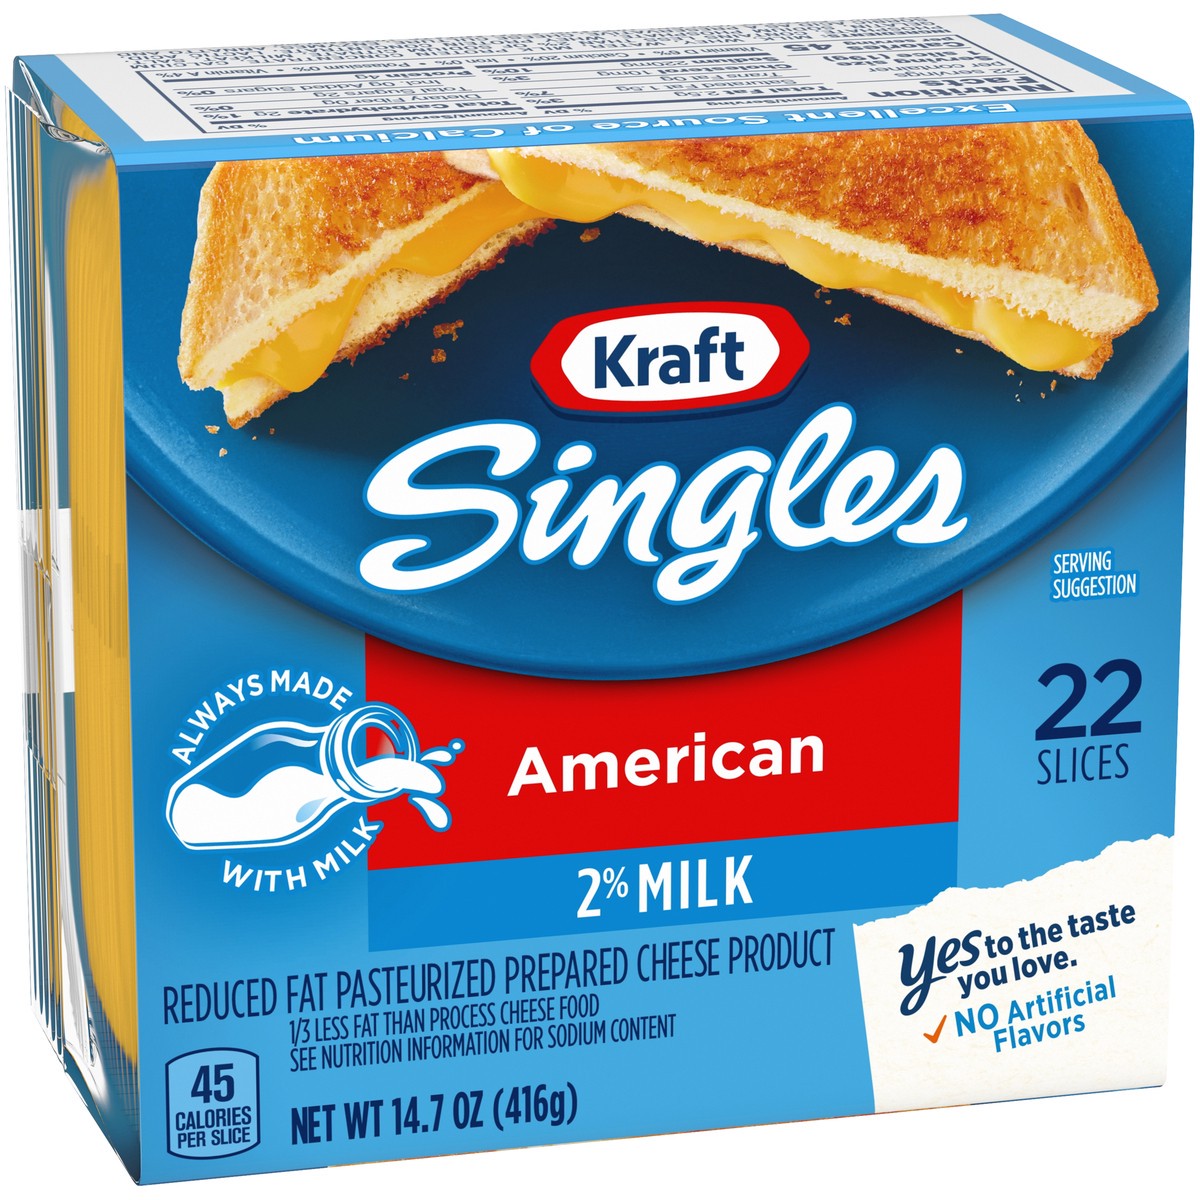 slide 3 of 9, Kraft Singles 2% Pasteurized Prepared Cheese Product American Slices, 22 ct Pack, 22 ct